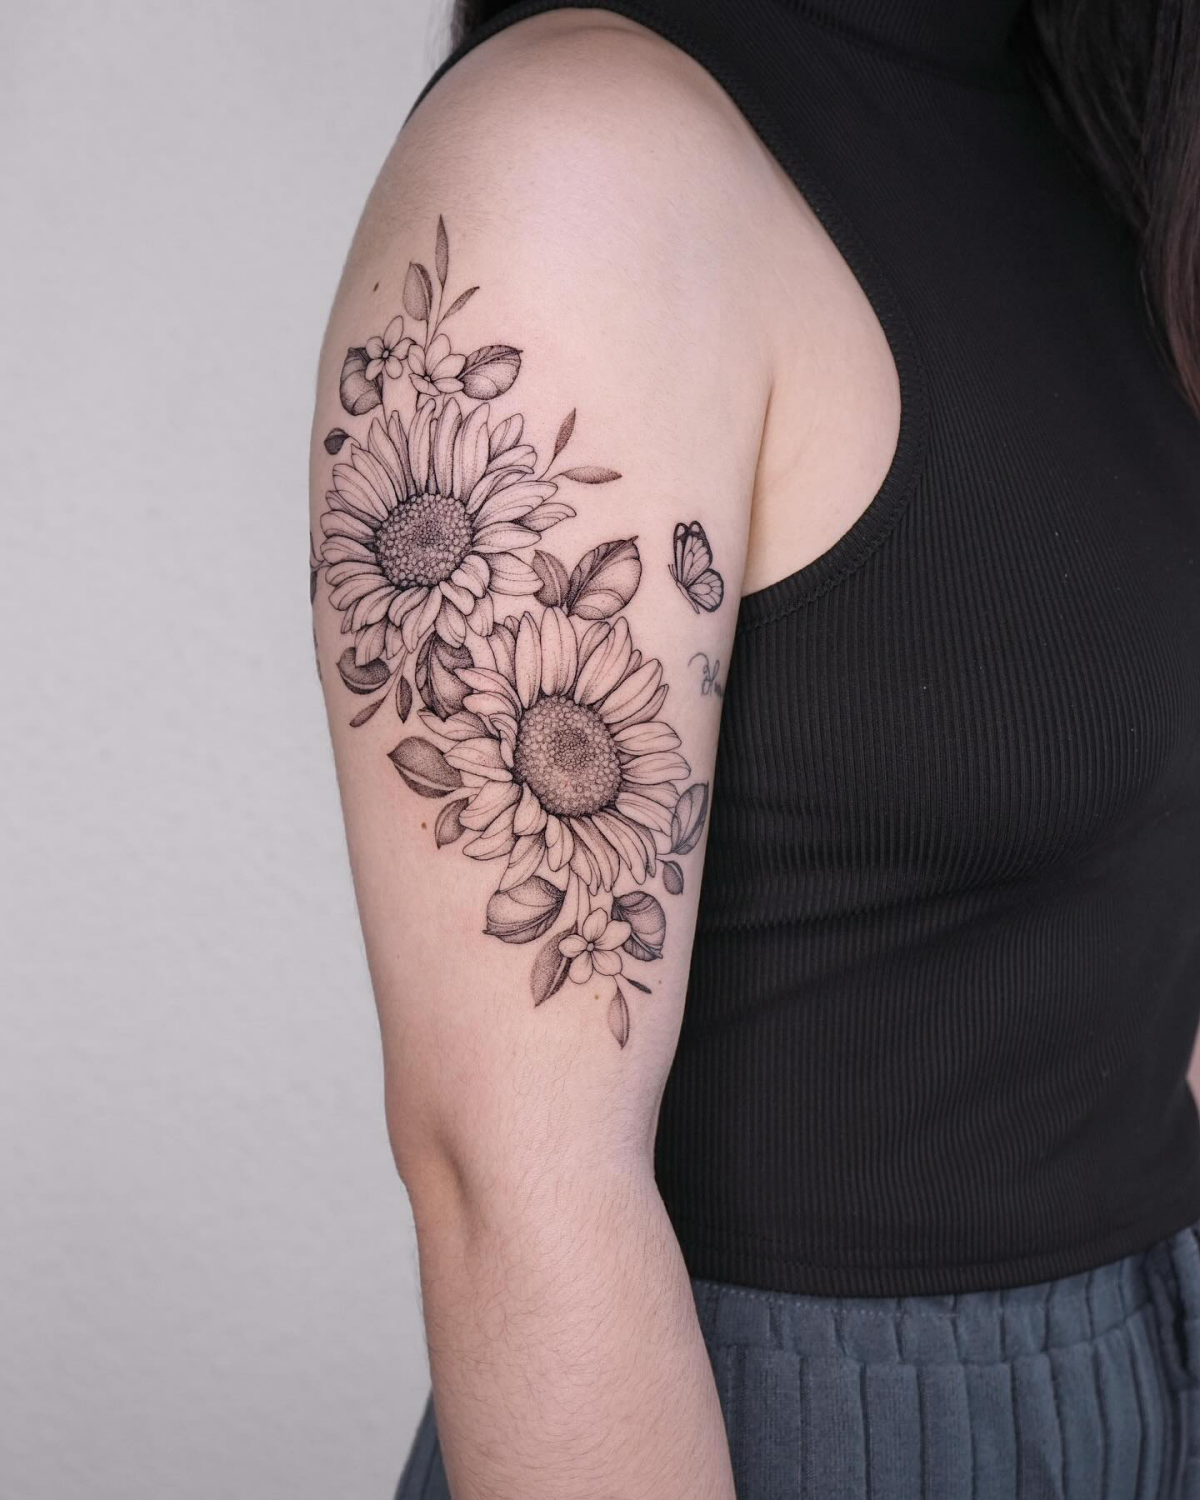 black and white tattoo of butterflies and sunflowers